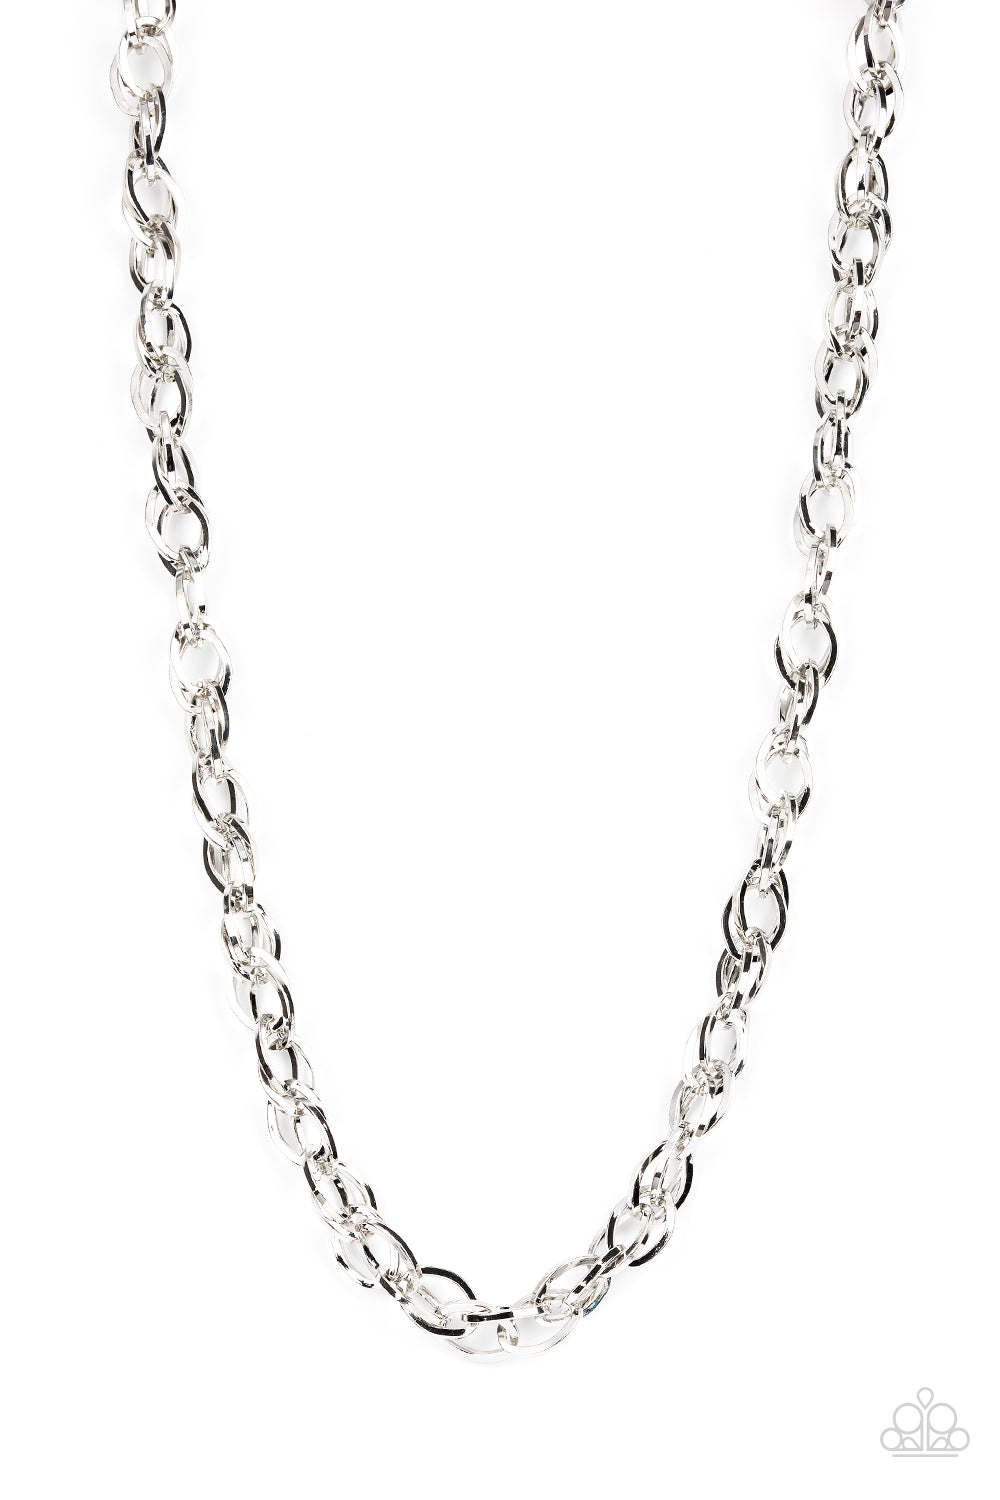 Custom Couture - Silver Oversized Oval Link Paparazzi Men's Necklace